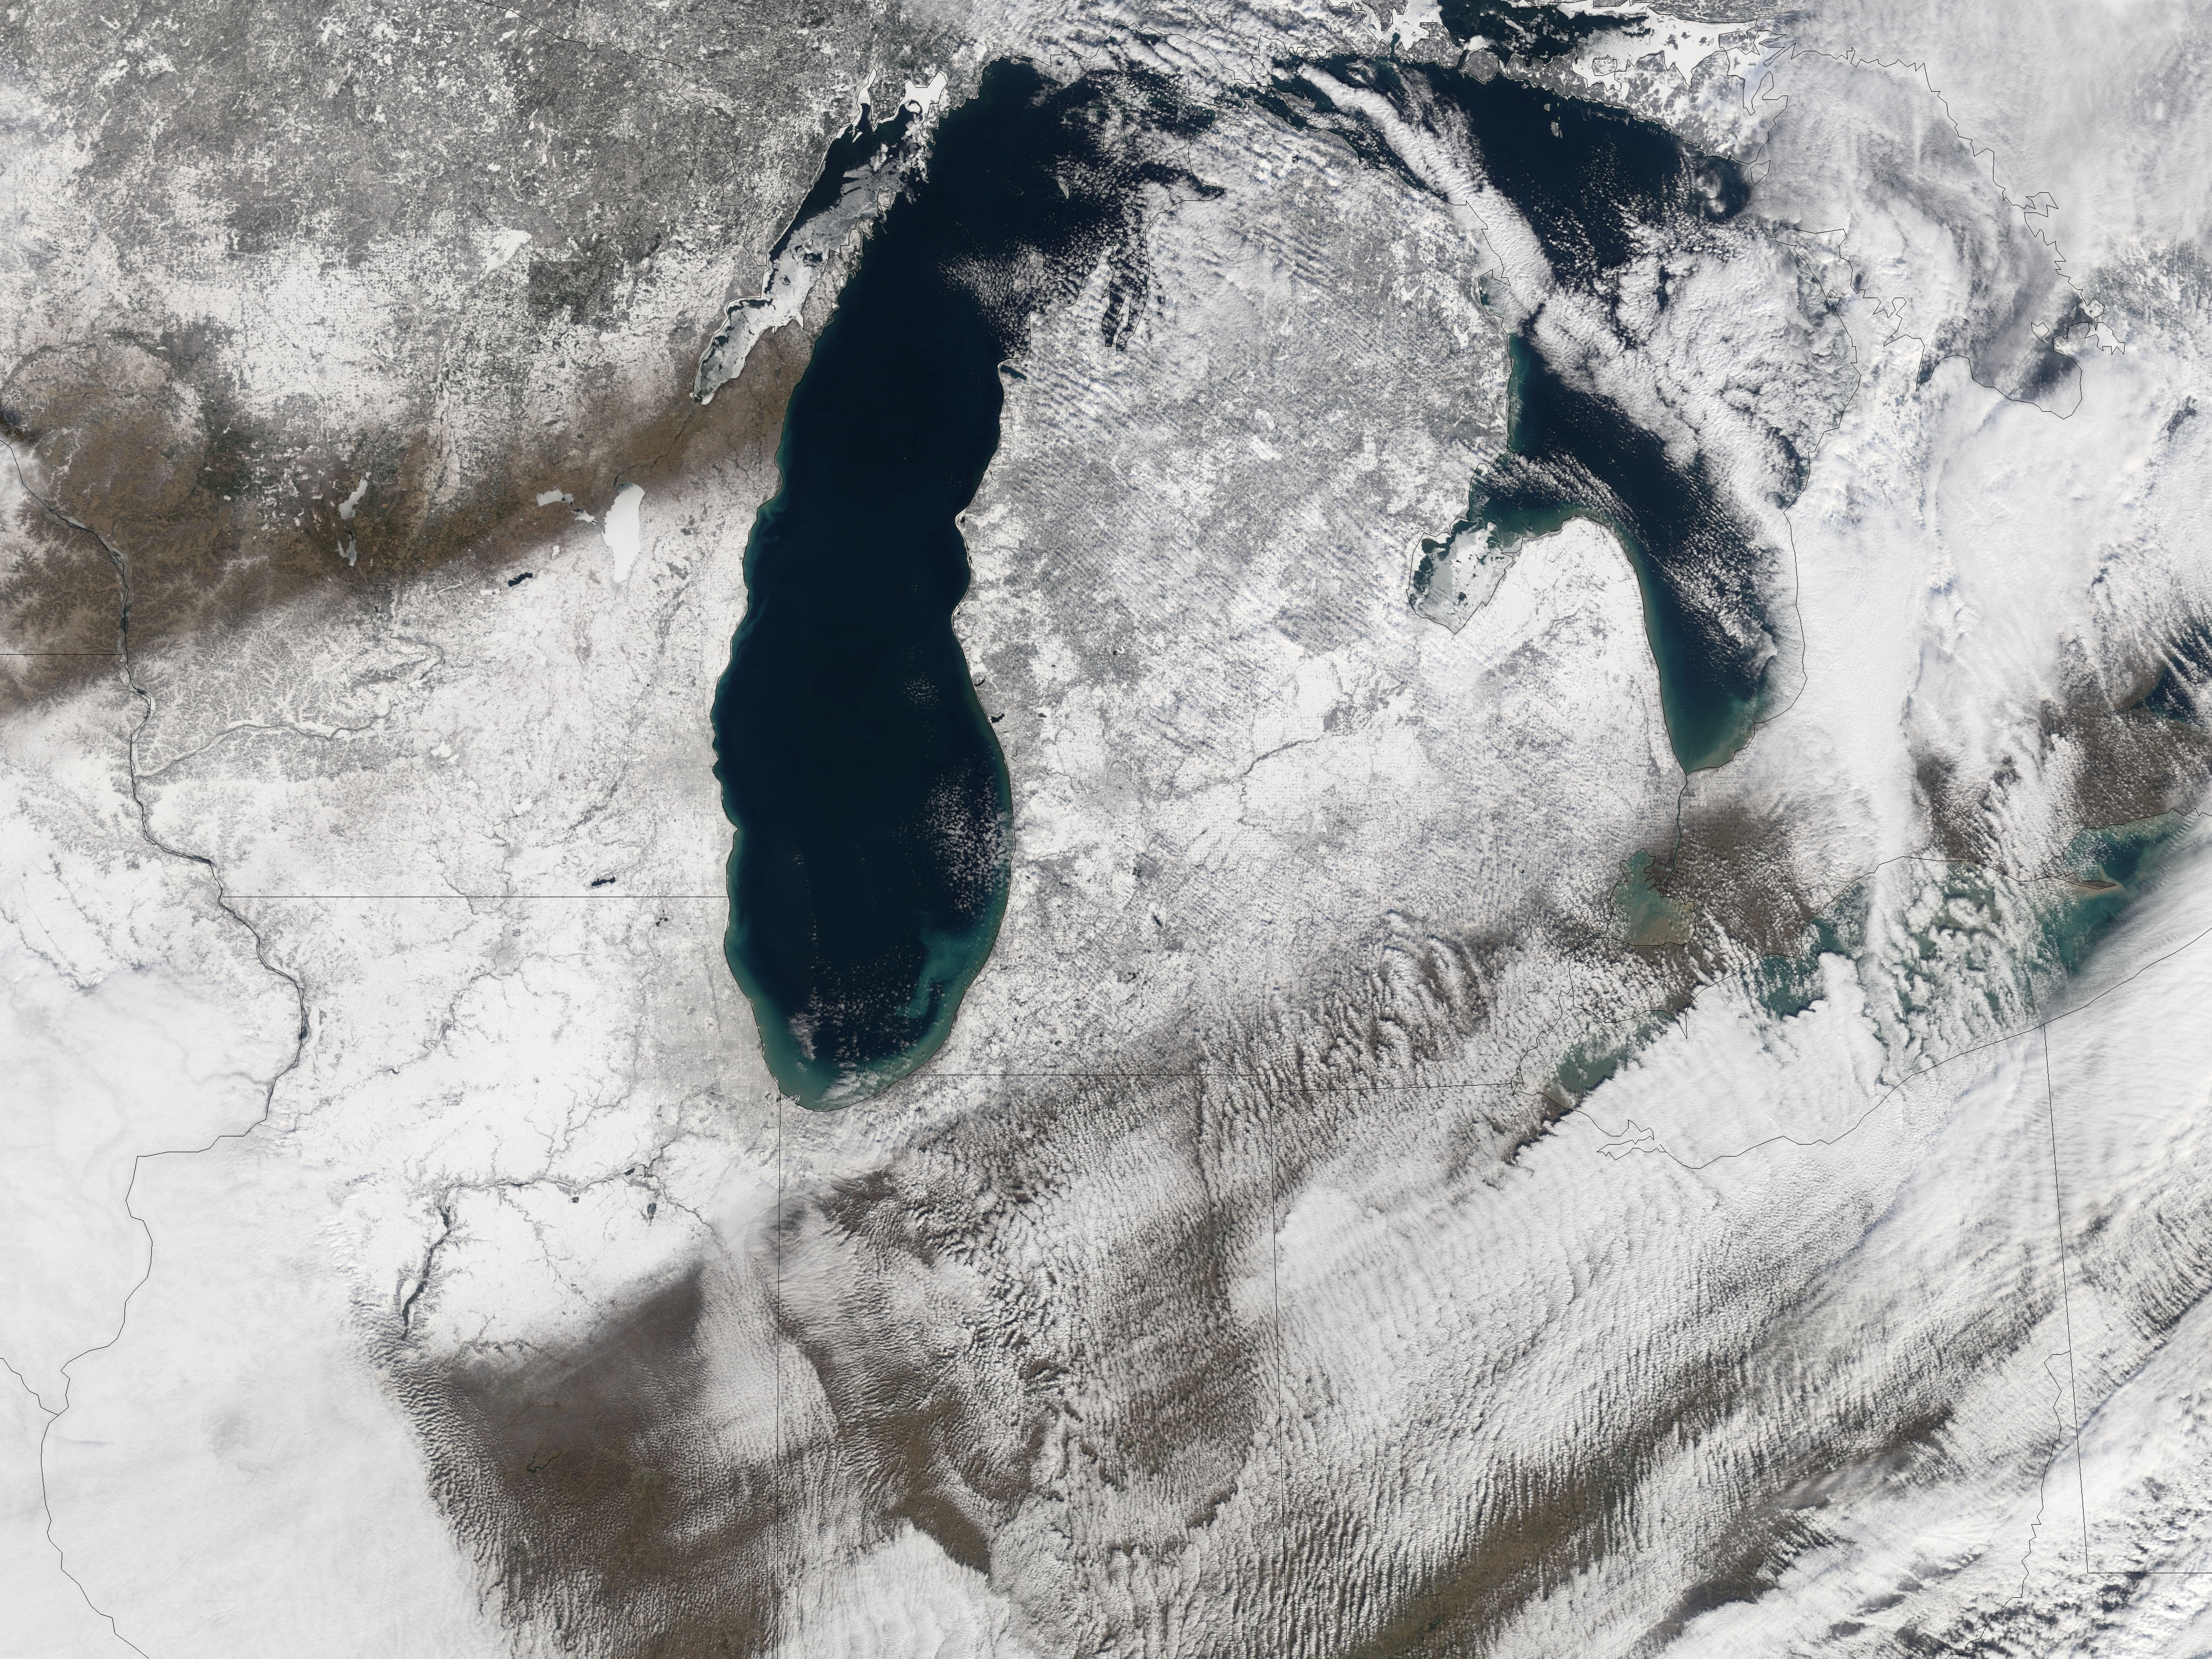 NASA Visible Earth: Snow storm across the Upper Midwest